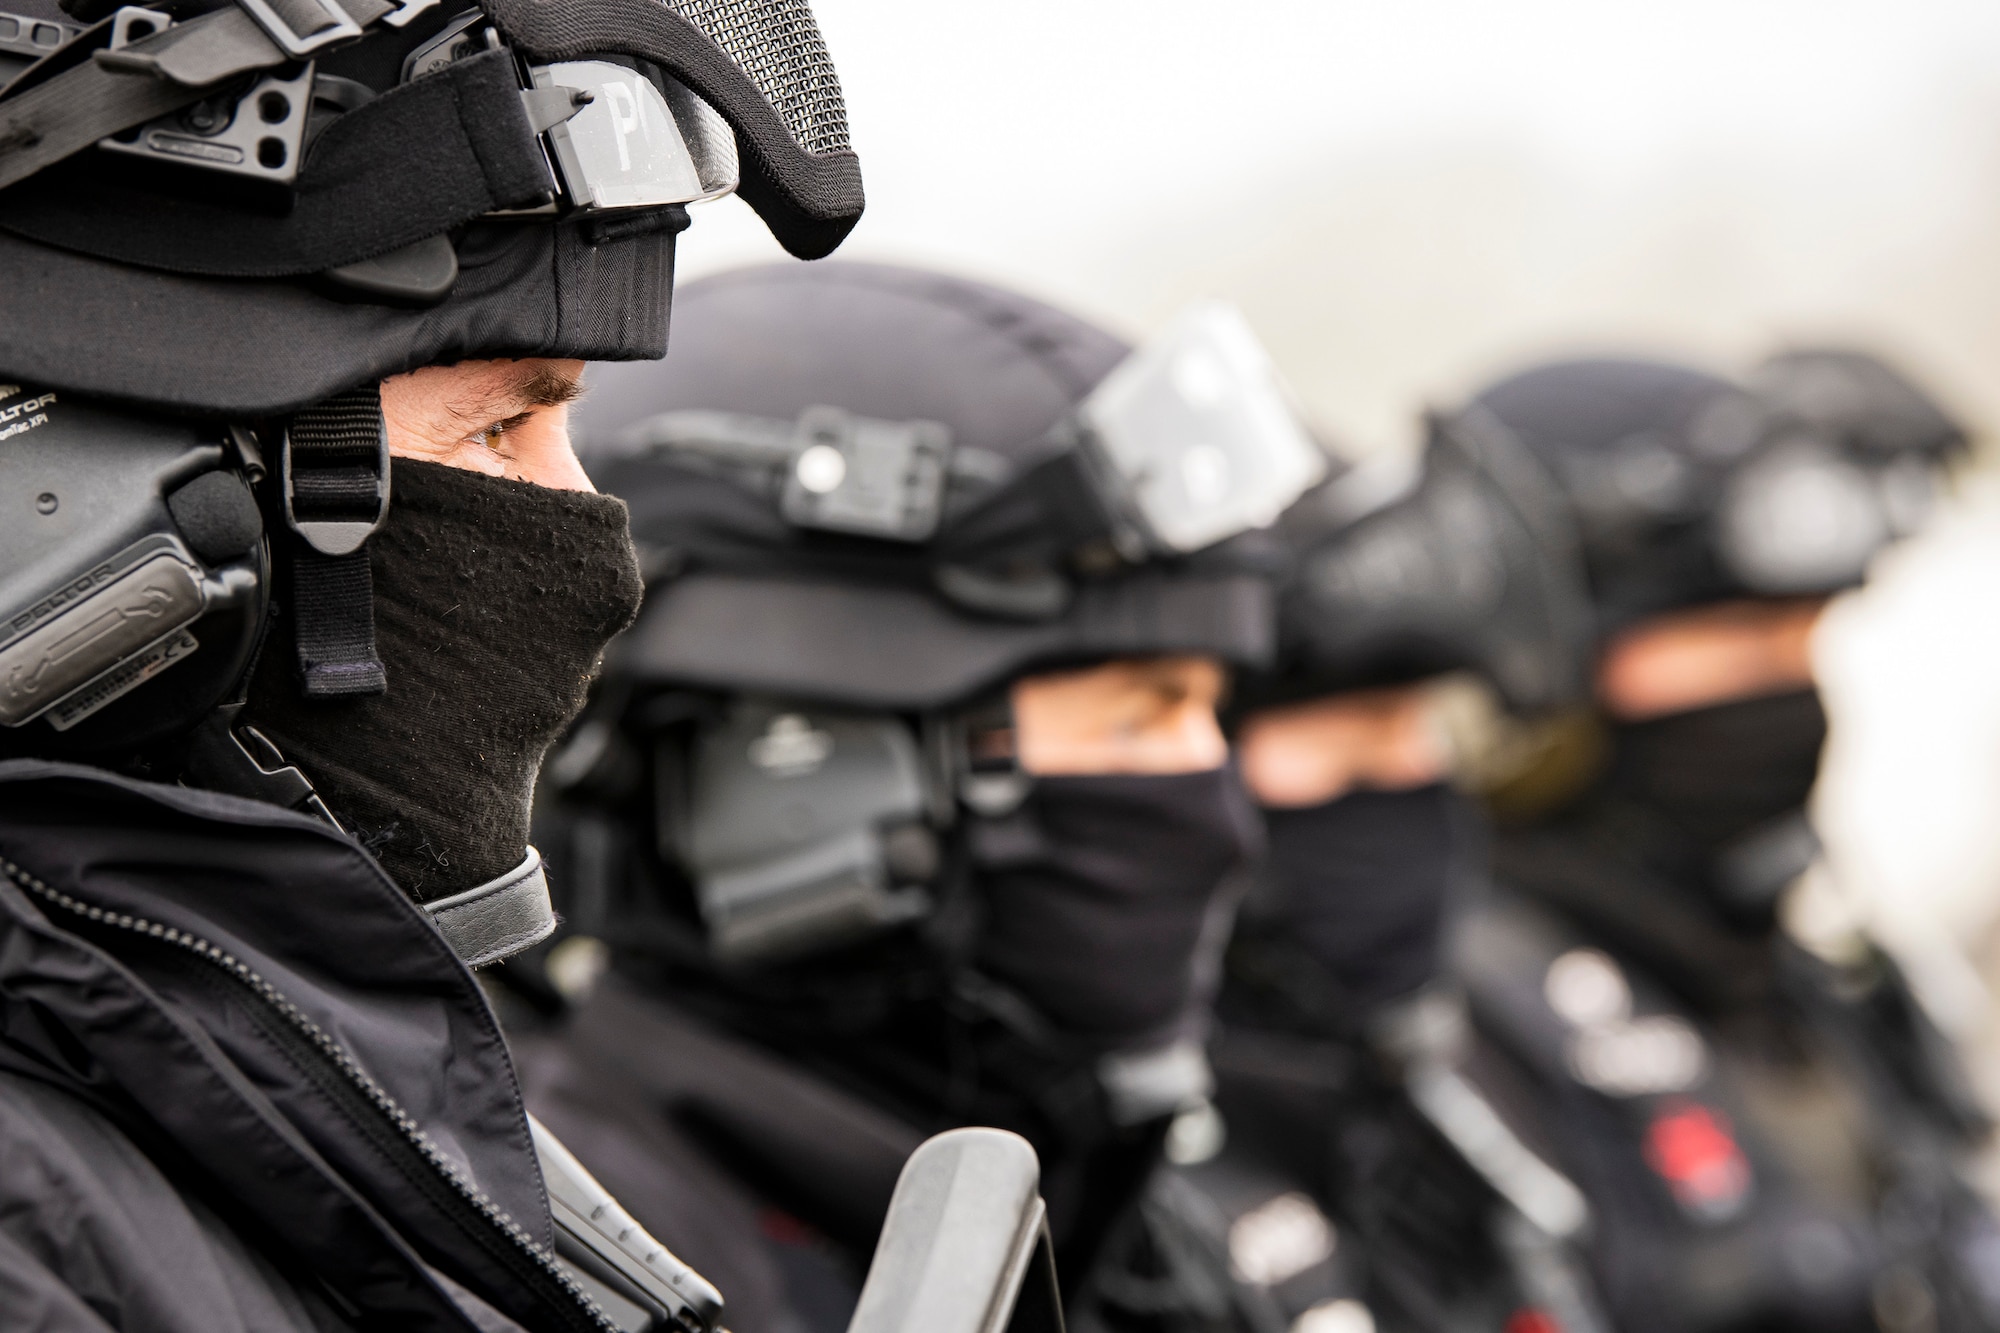 Policemen, from the Northamptonshire Police Department, stand in formation prior to a field training exercise at RAF Croughton, England, Mar. 3, 2021. The NHPD utilized the 422d Security Forces Squadron training complex to help strengthen their tactics and techniques. Events like this help strengthen the local partnership between the 422d SFS and the NHPD. (U.S. Air Force photo by Senior Airman Eugene Oliver)